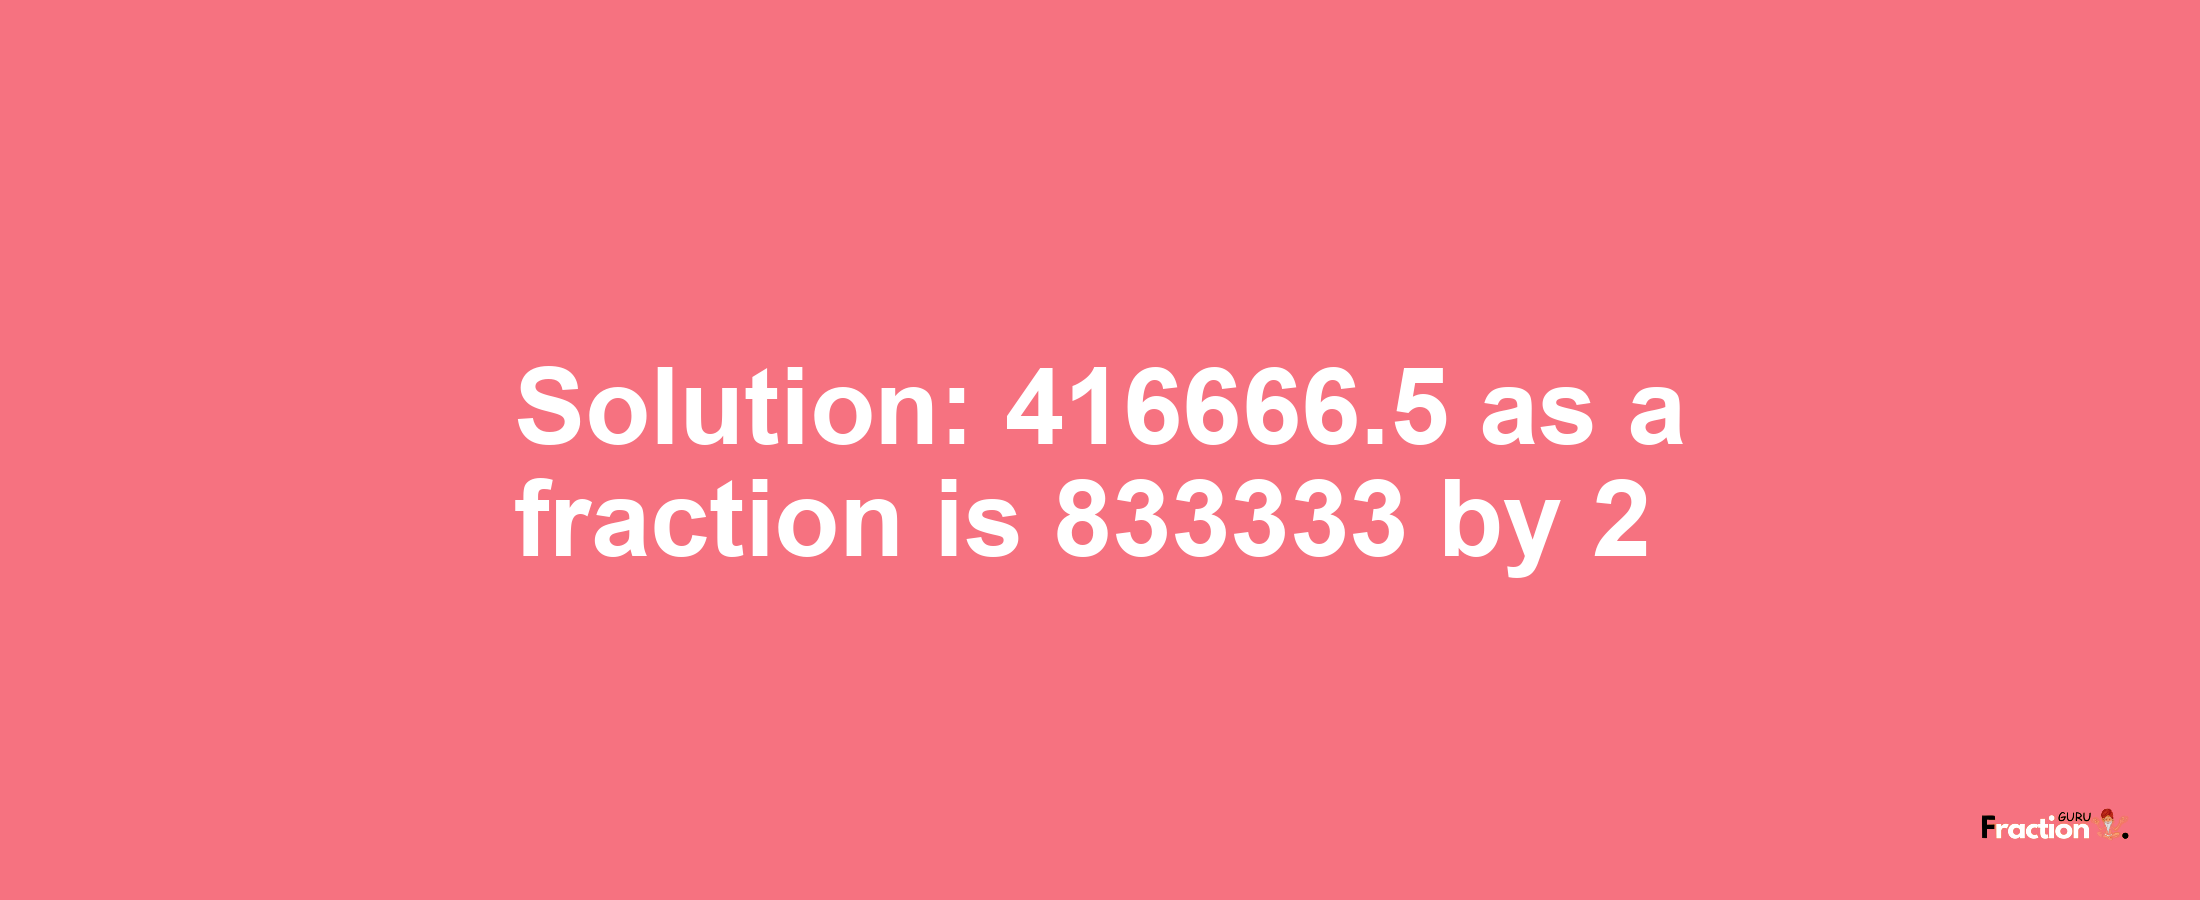 Solution:416666.5 as a fraction is 833333/2